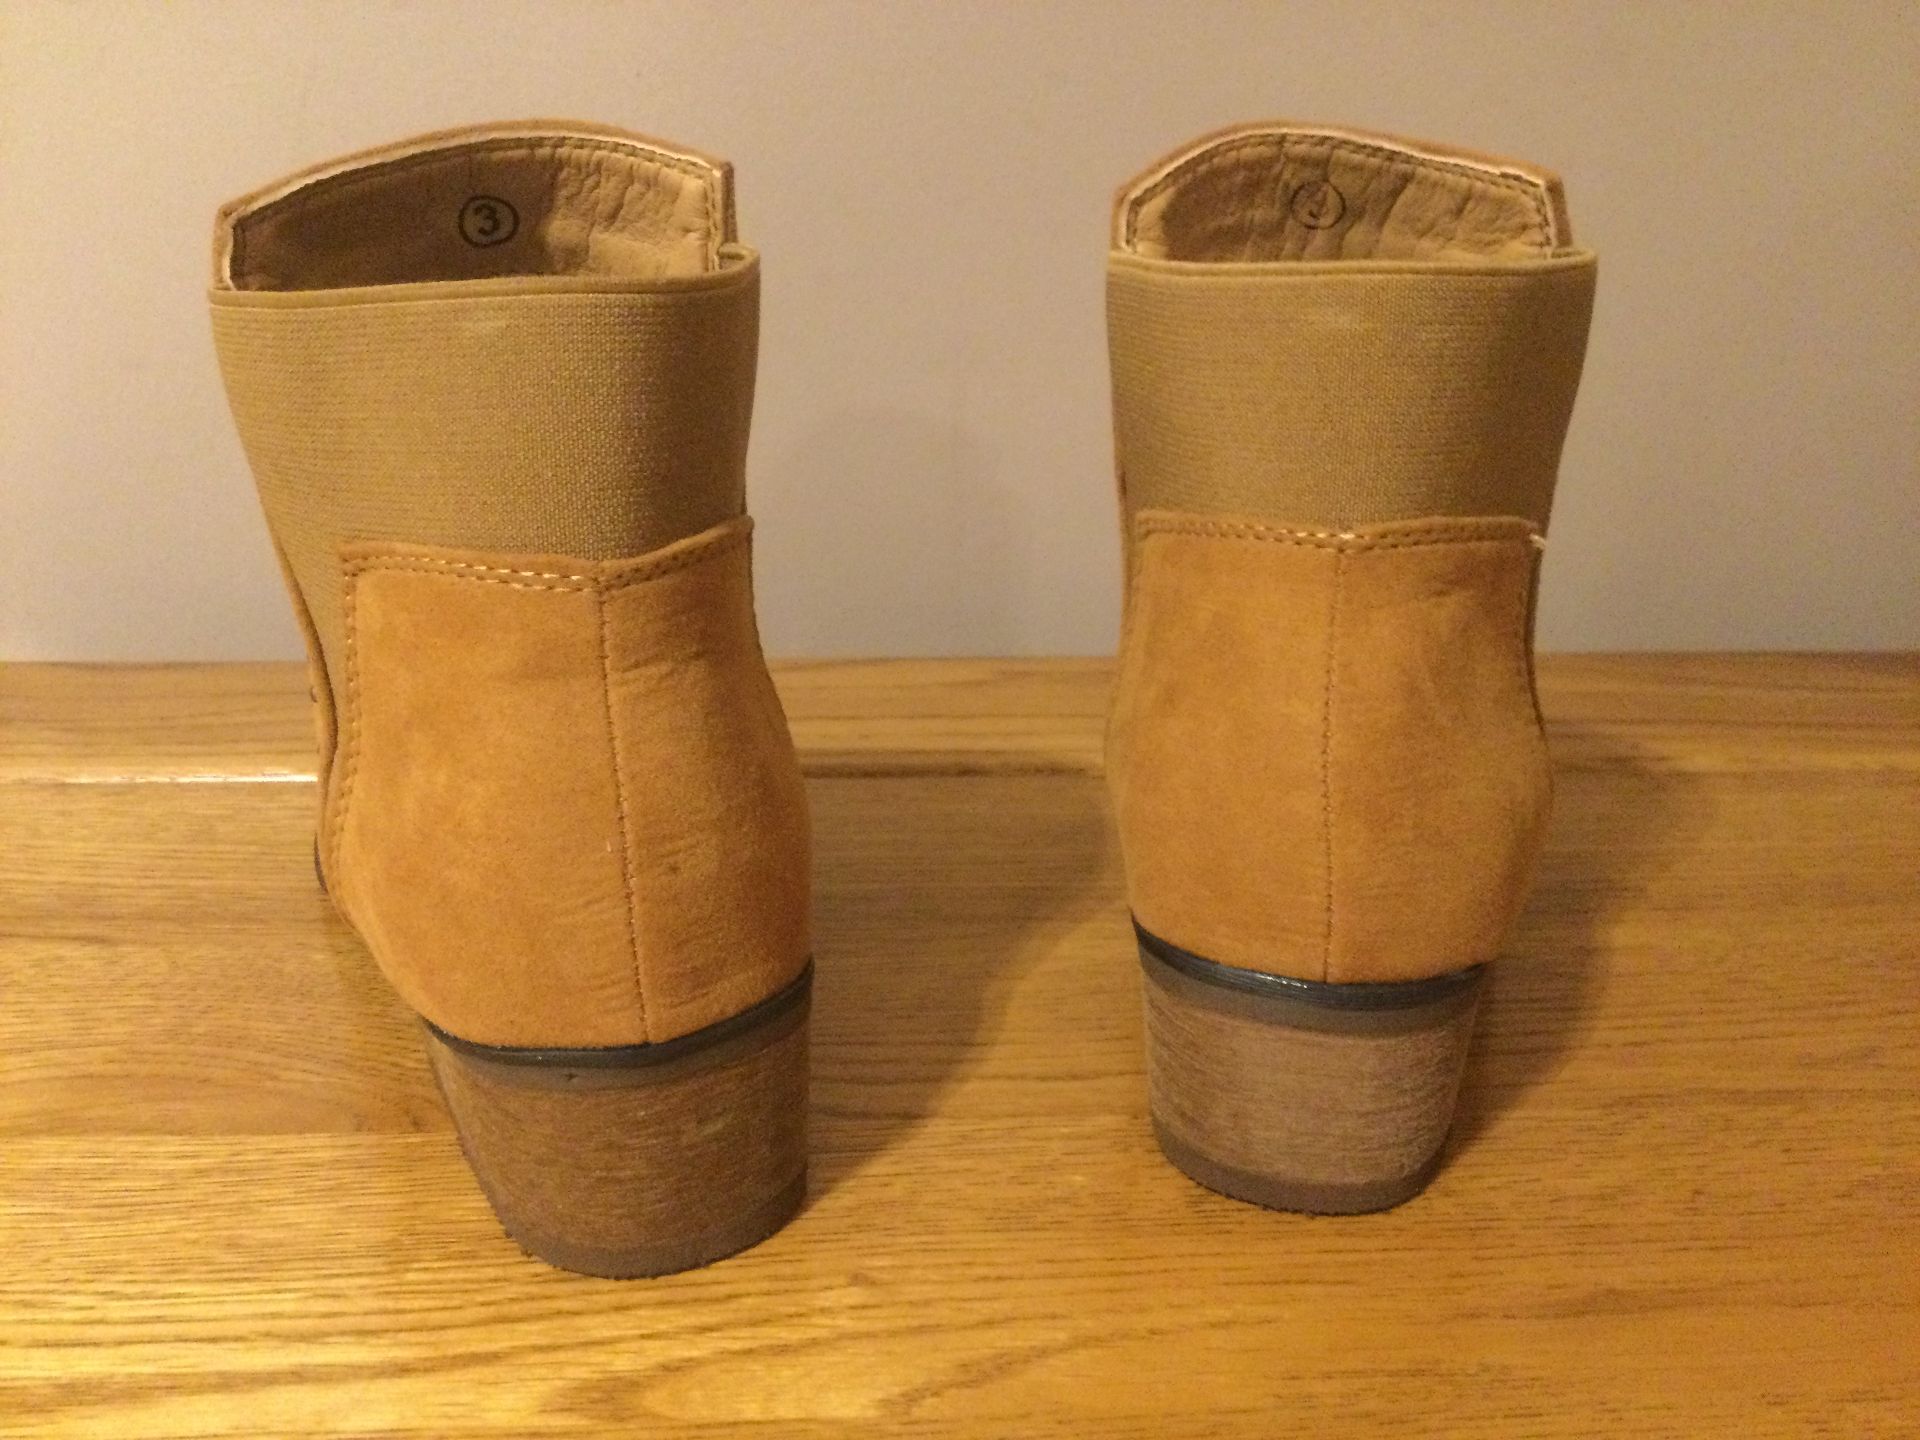 Dolcis “Wendy” Low Heel Ankle Boots, Size 6, Tan - New RRP £45.99 - Image 4 of 7